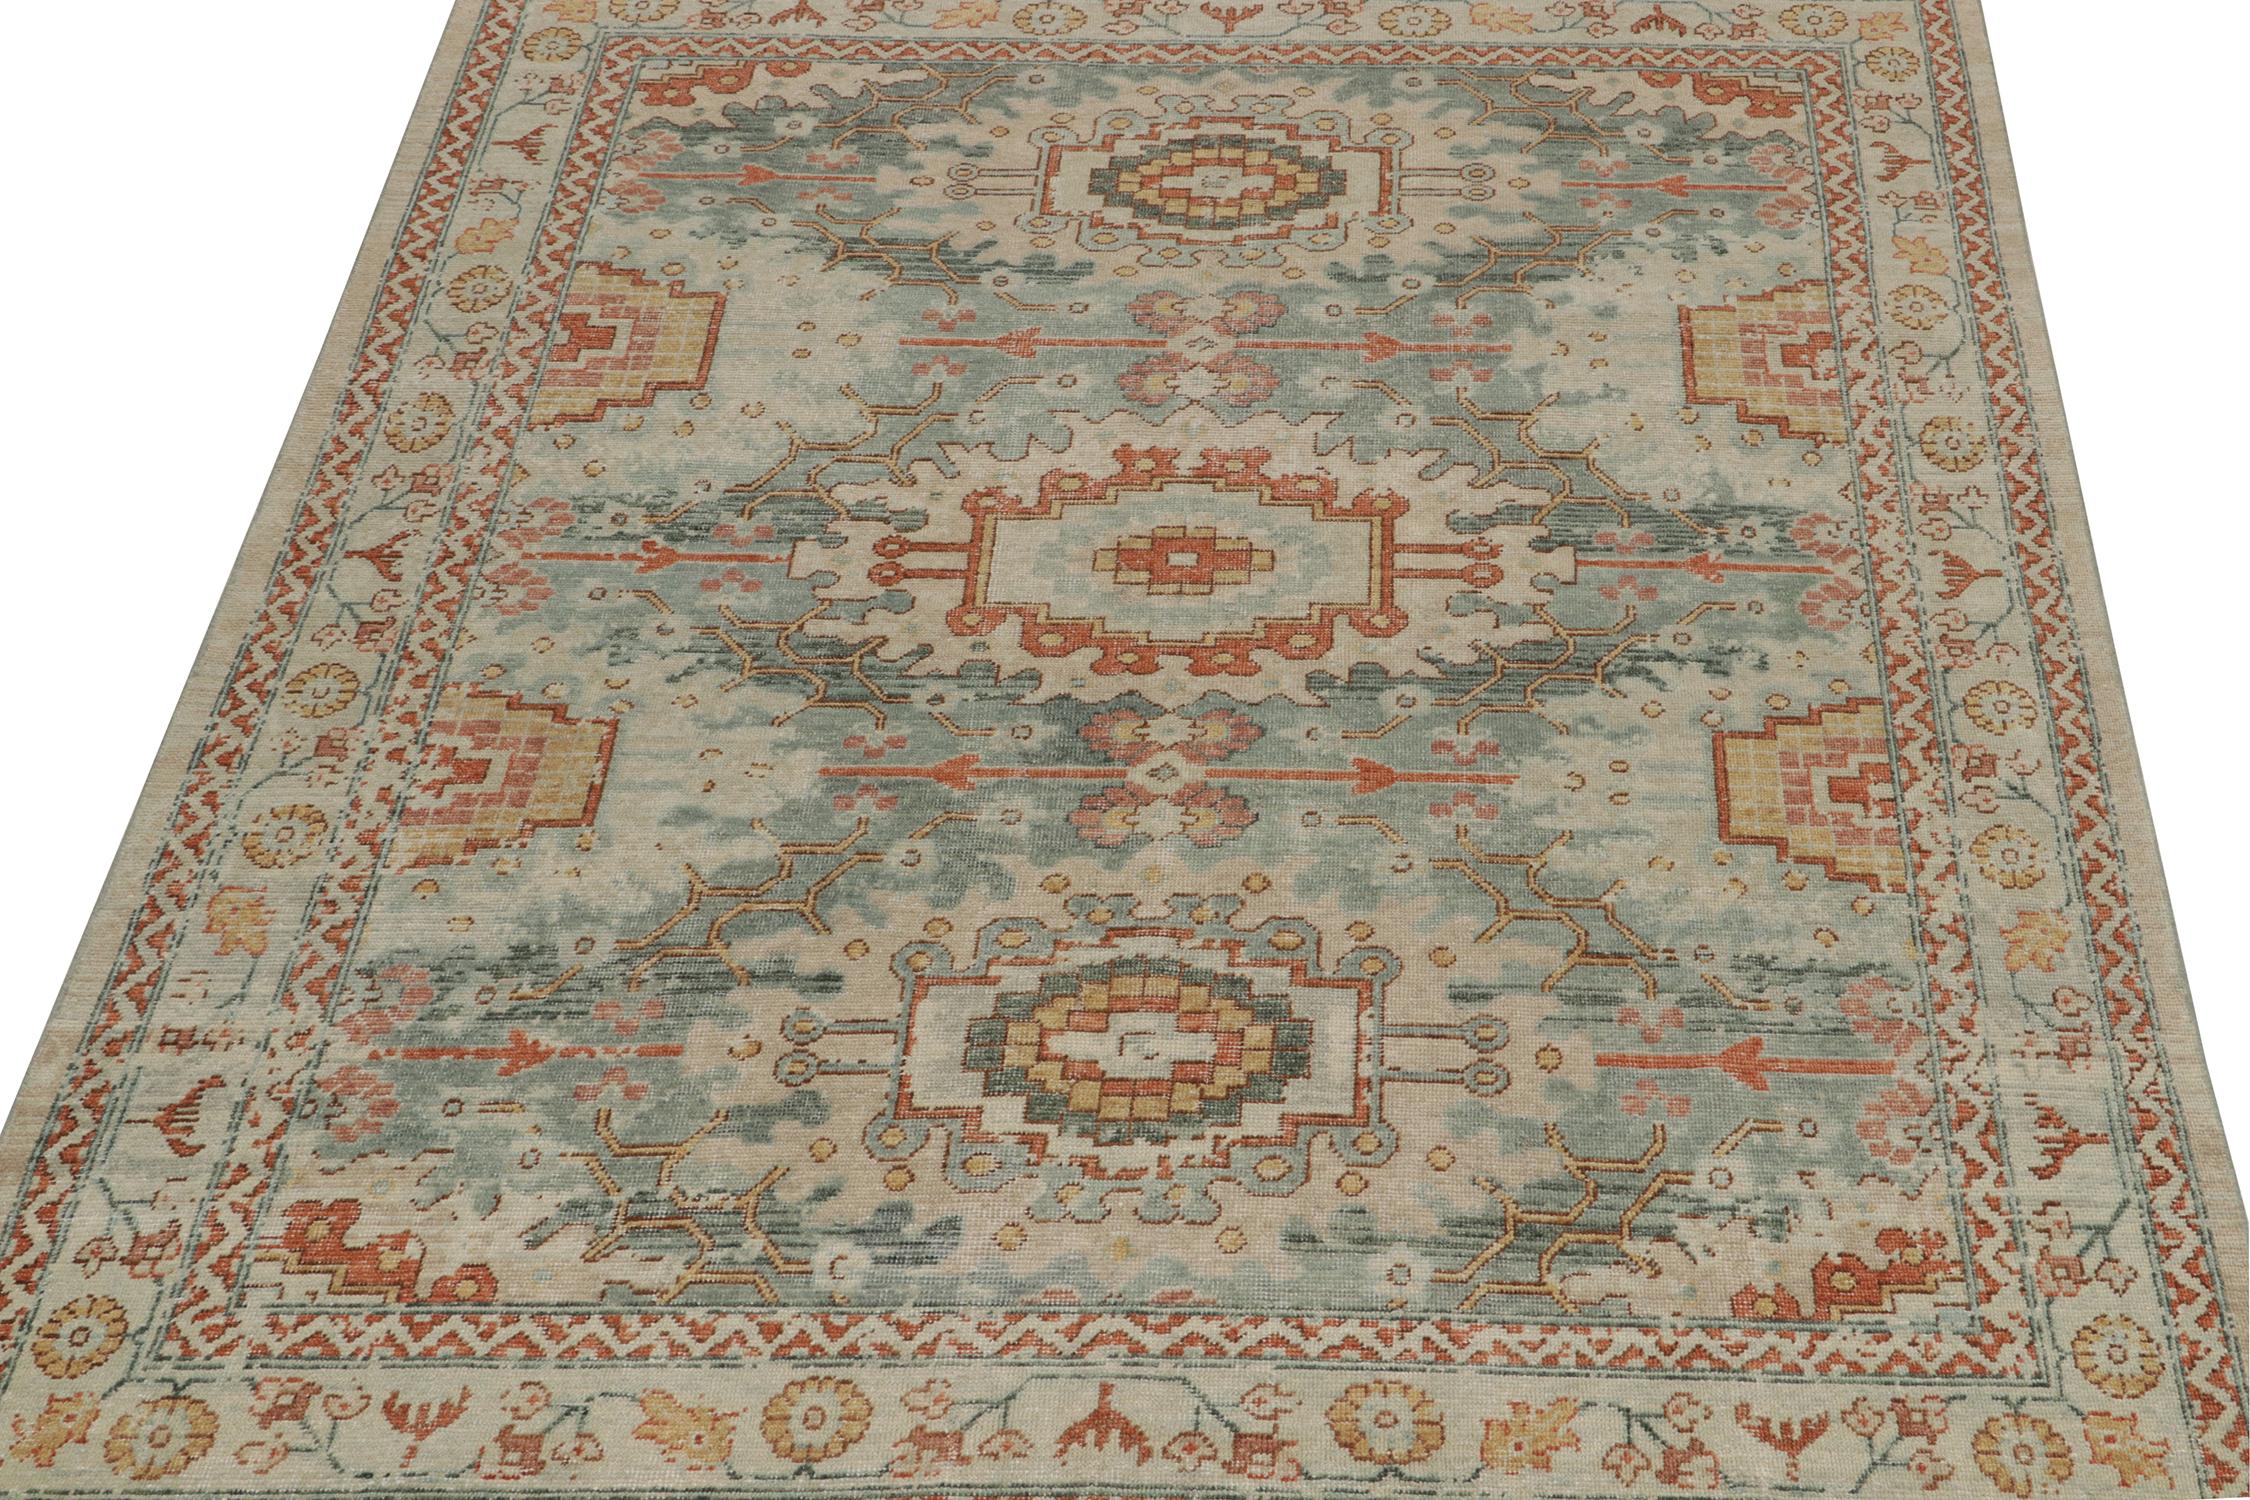 Indian Rug & Kilim’s Distressed Tribal Style Rug in Blue with Rustic Floral Patterns For Sale